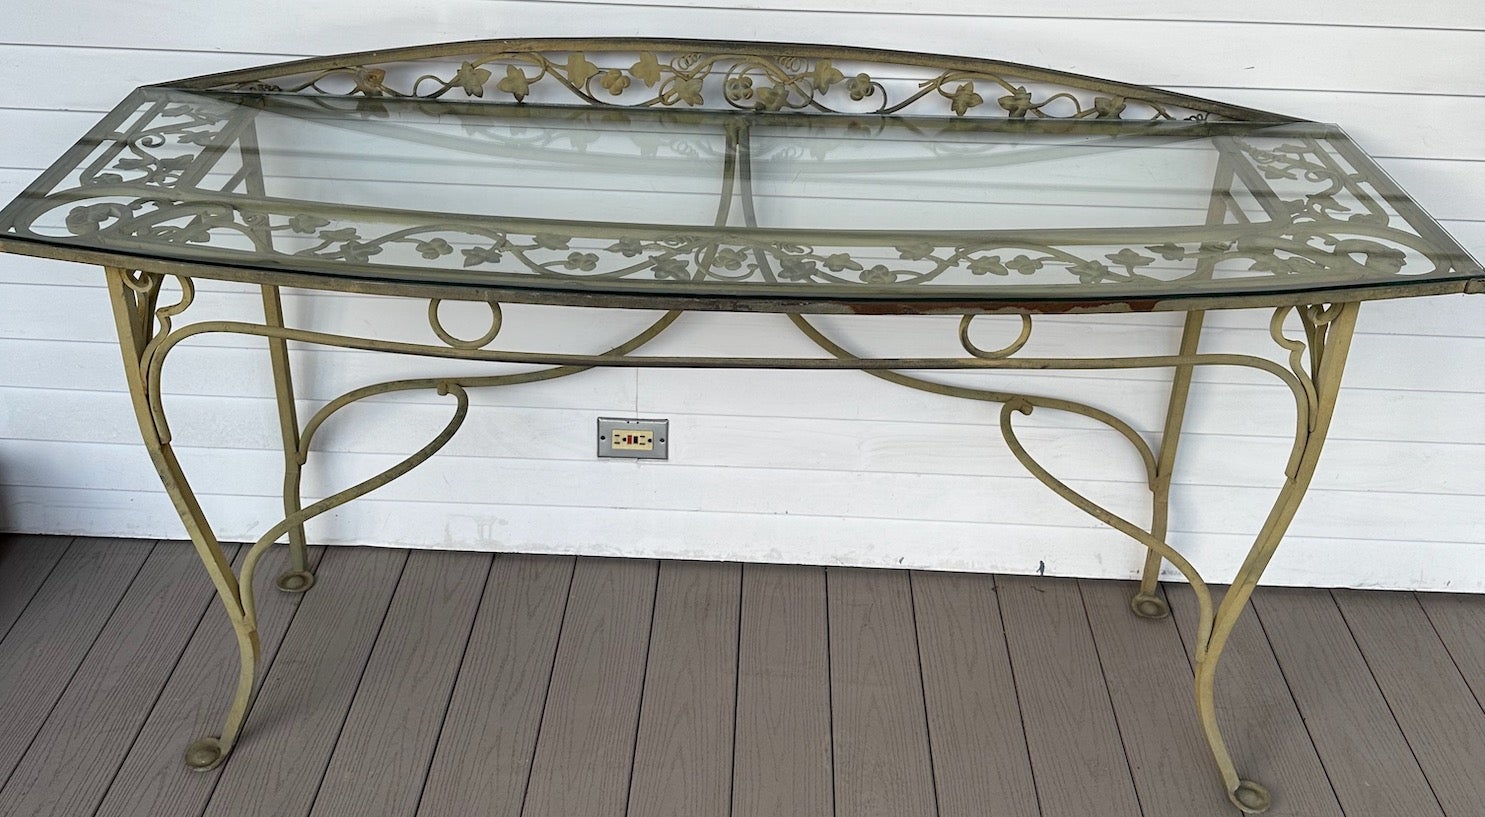 This is an Important vintage wrought iron and glass console table in the style of John Salterini. This exact table is shown in early Salterini catalogs and is called by the company  